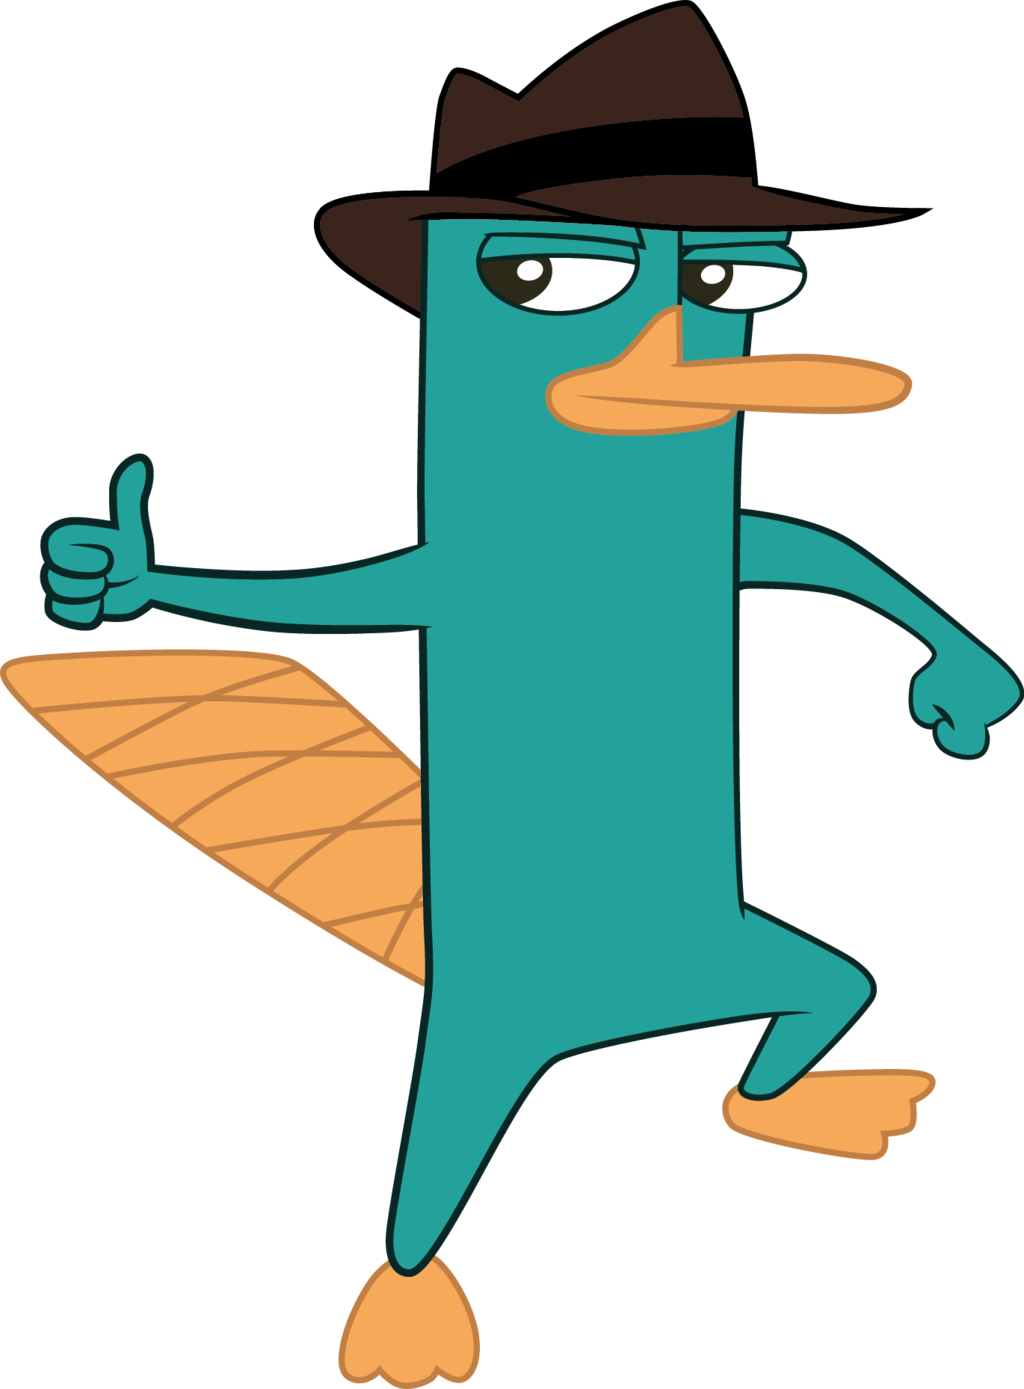 Perry the platypus concept.